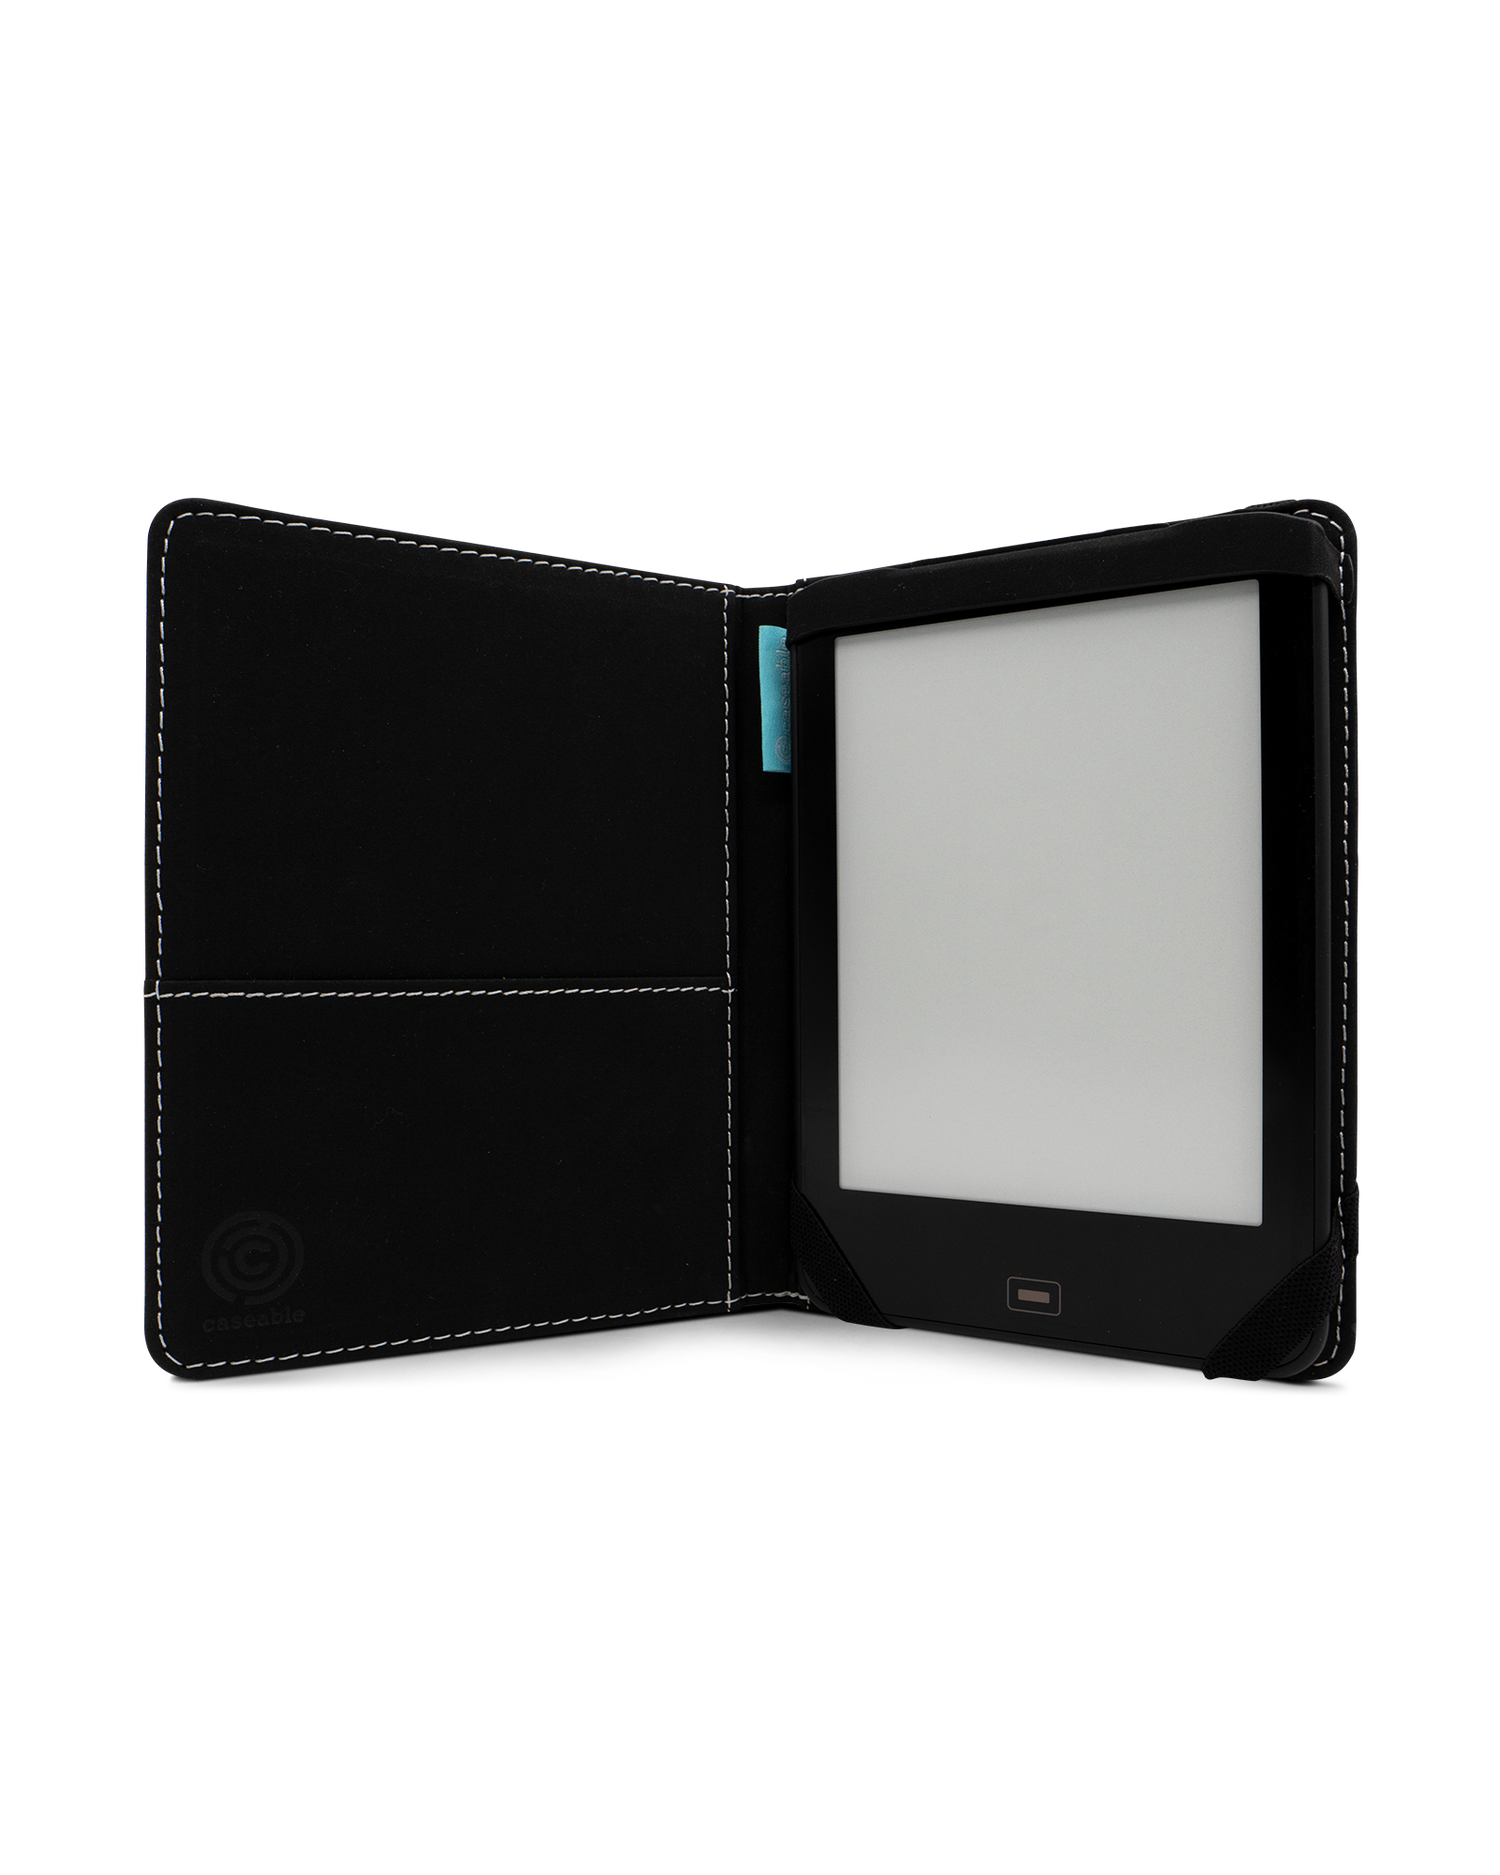 Penrose Pattern eReader Case for tolino vision 1 to 4 HD: Opened interior view